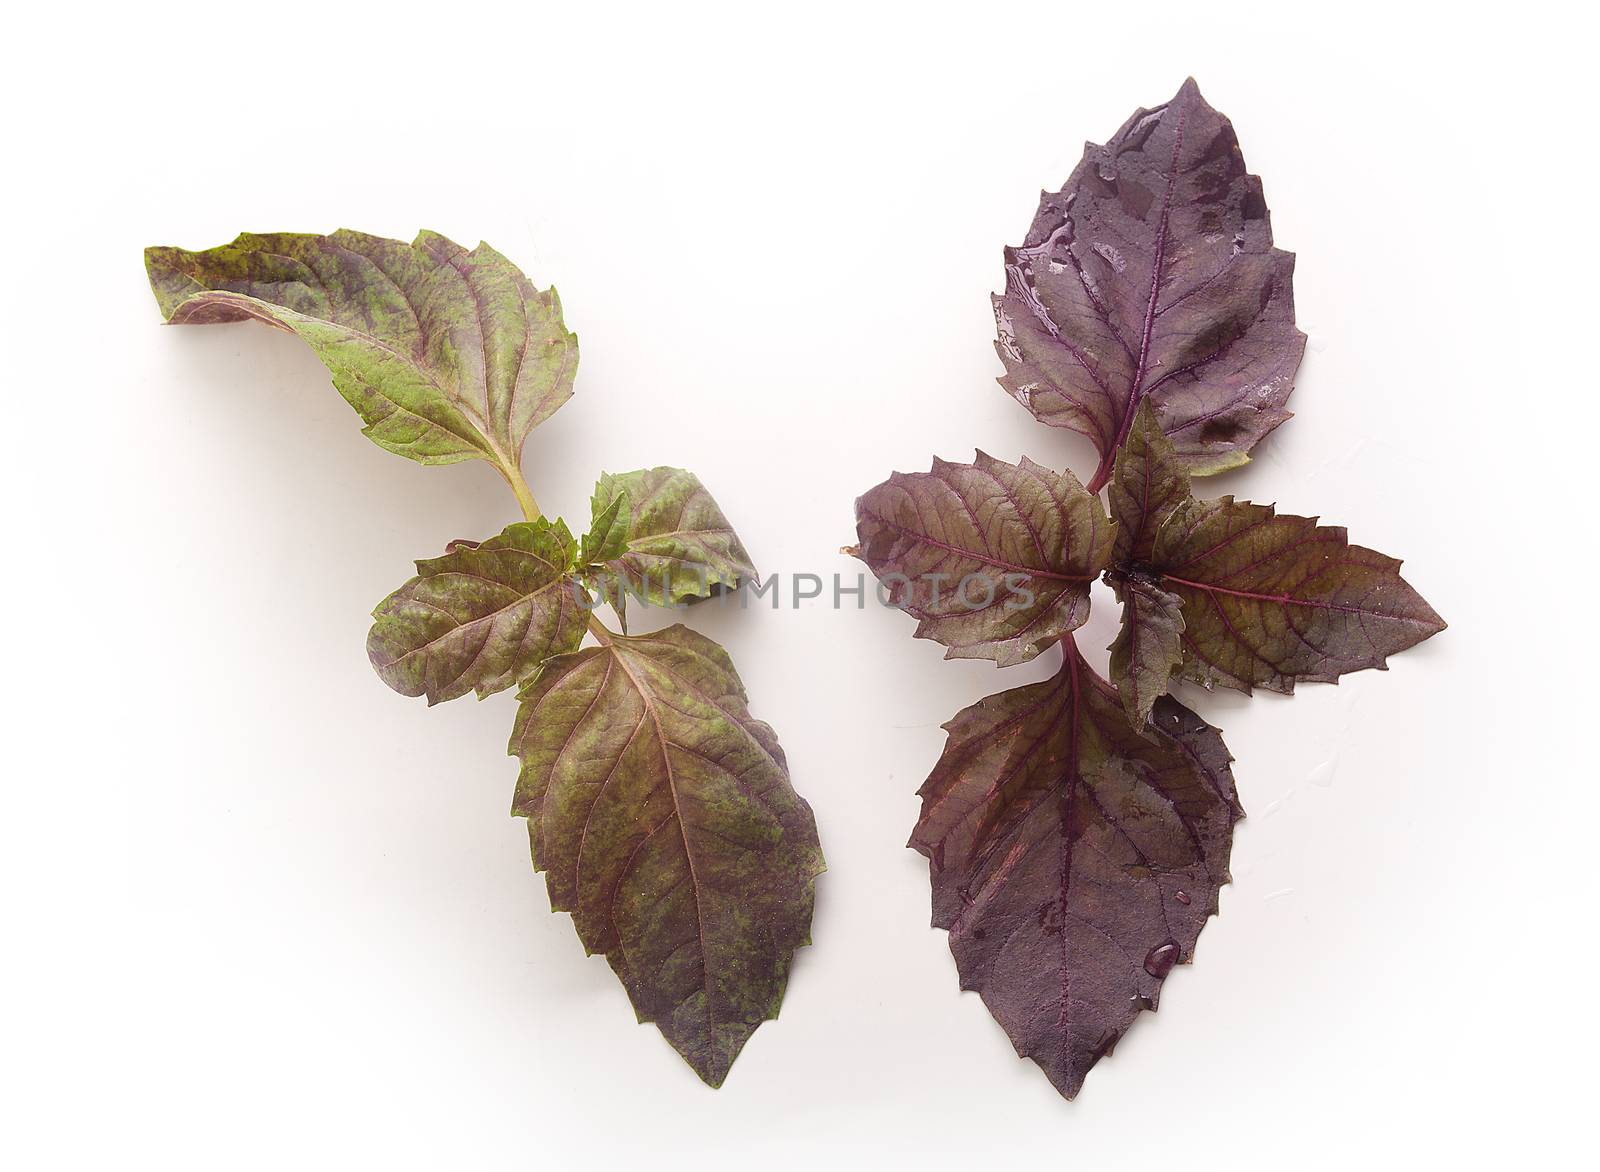 Top view of two branch of purple basil on the white background